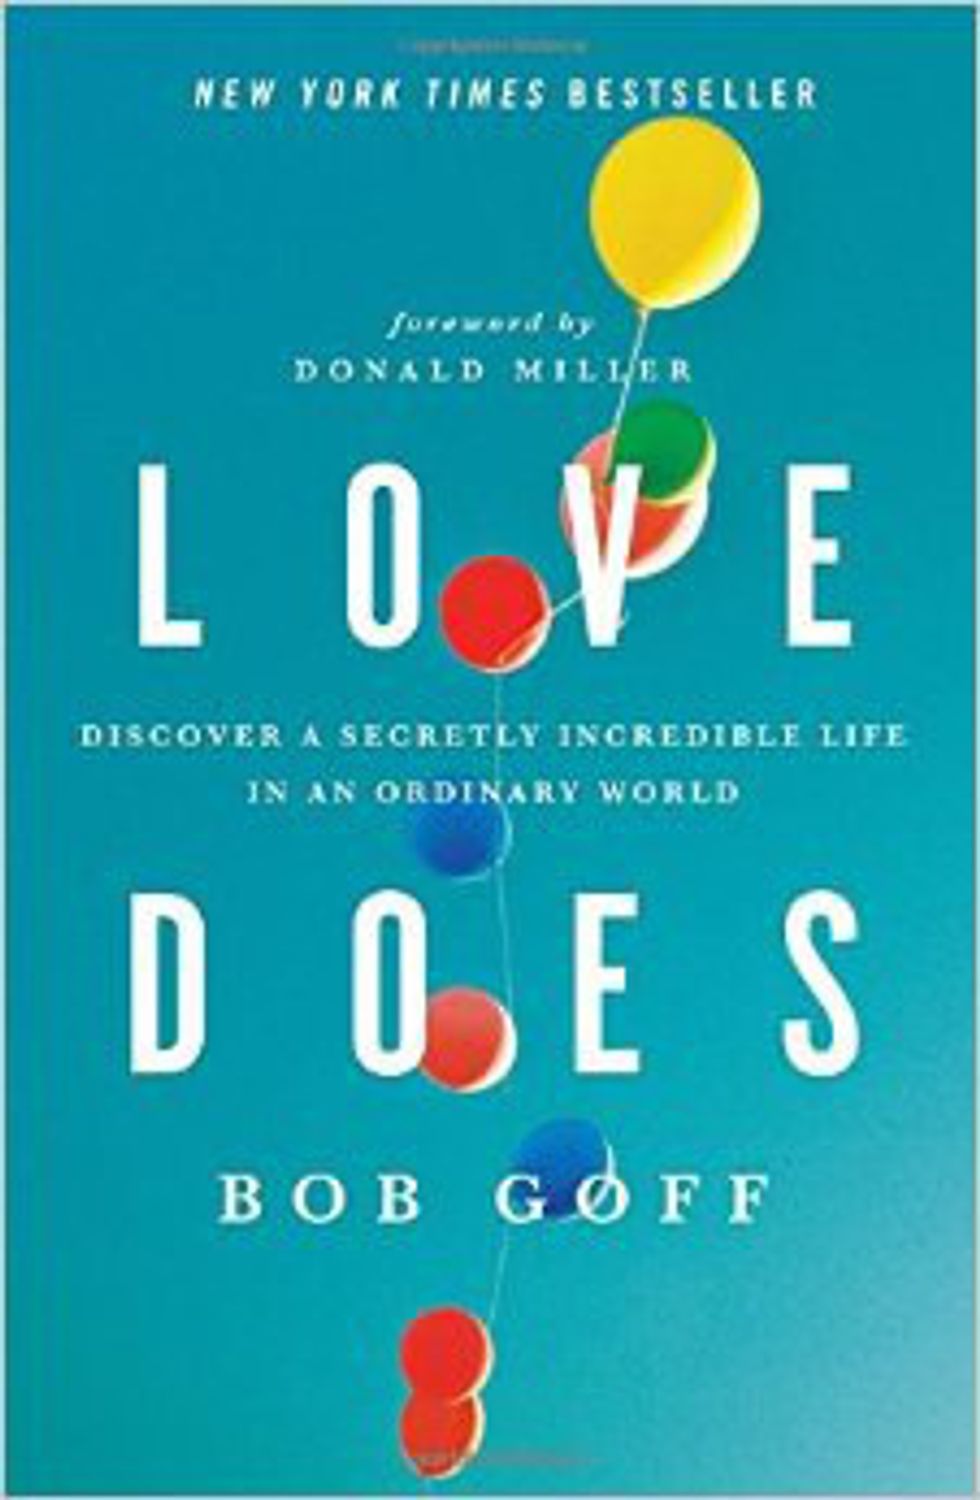 Love Does by Bob Goff